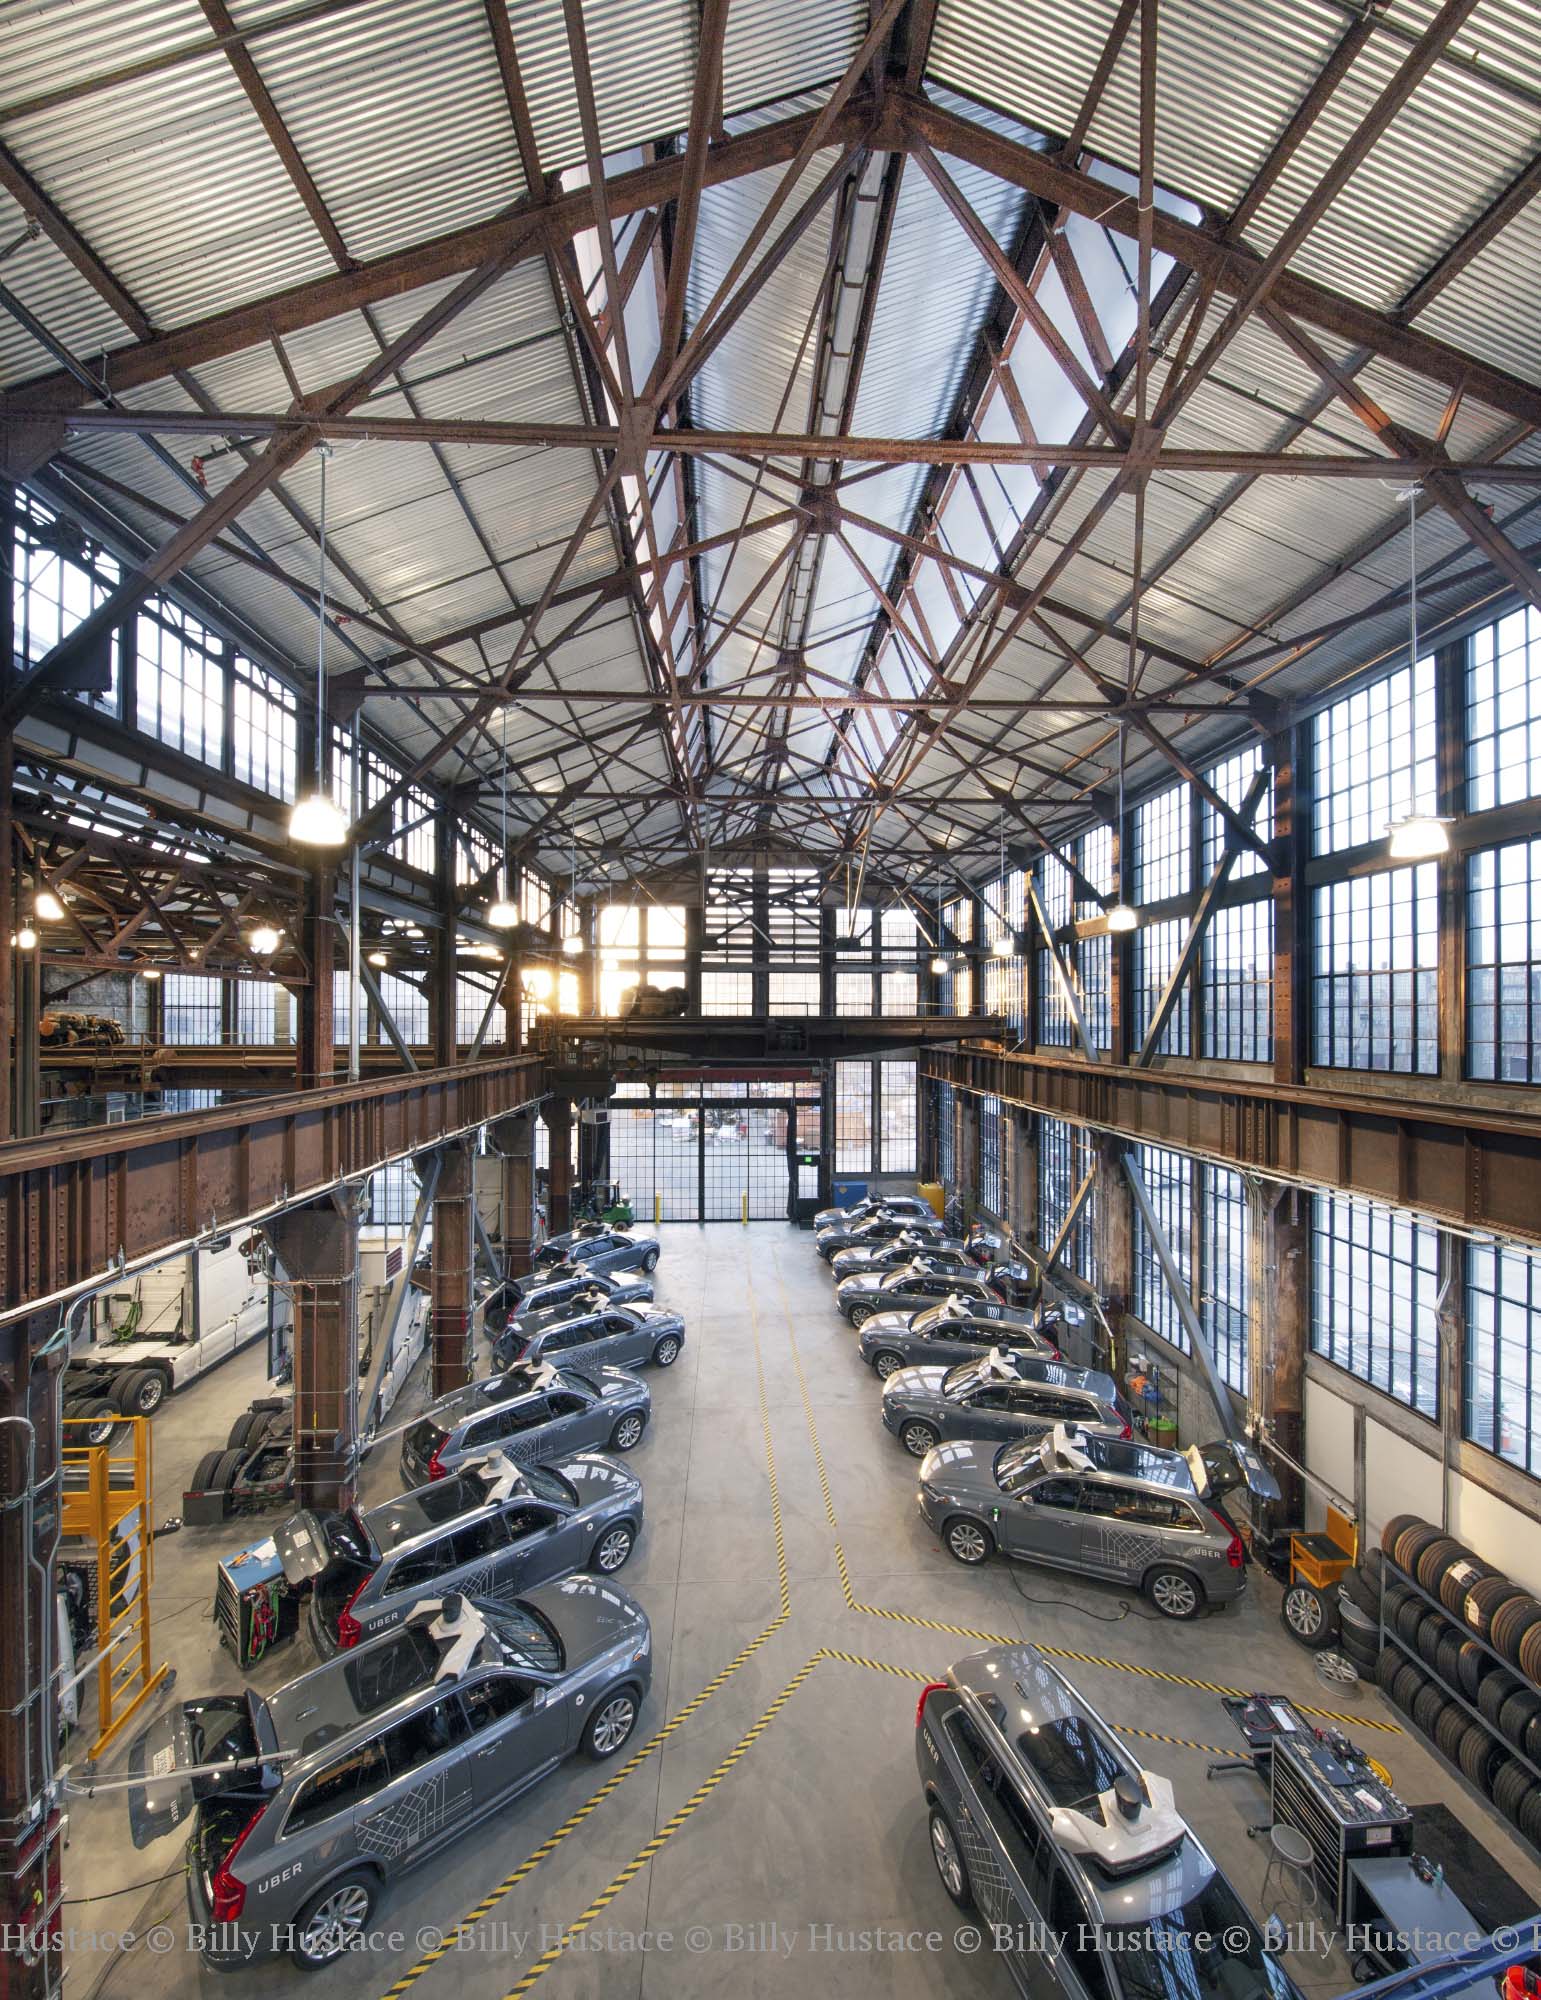 Interior view of a San Francisco building full of vehicles, hanging light fixtures, steel siding and large windows.